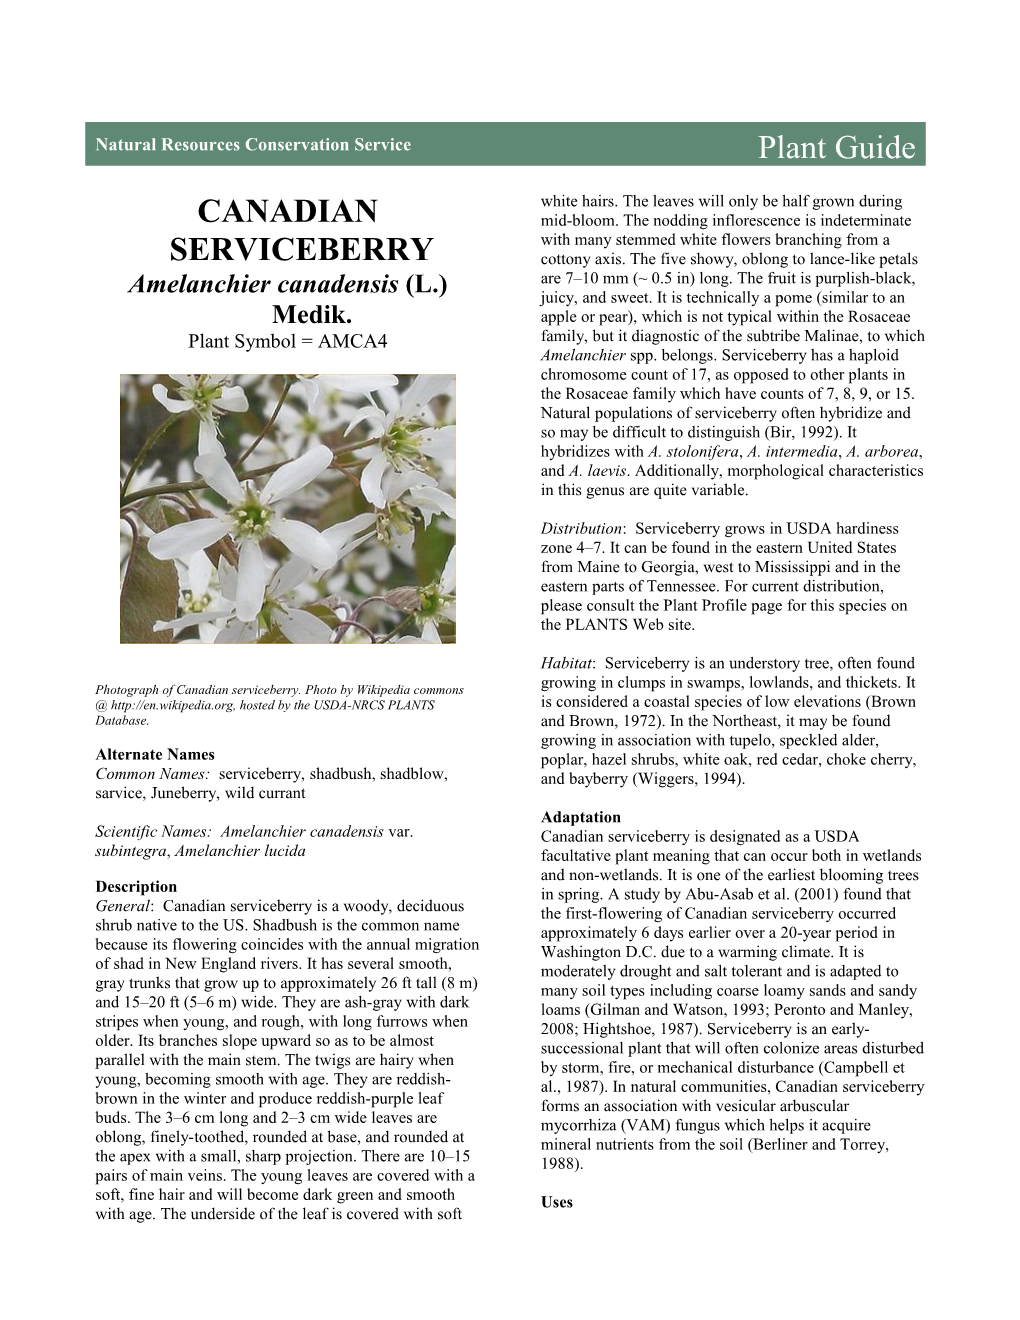 Canadian Serviceberry (Amelanchier Canadensis) Plant Guide